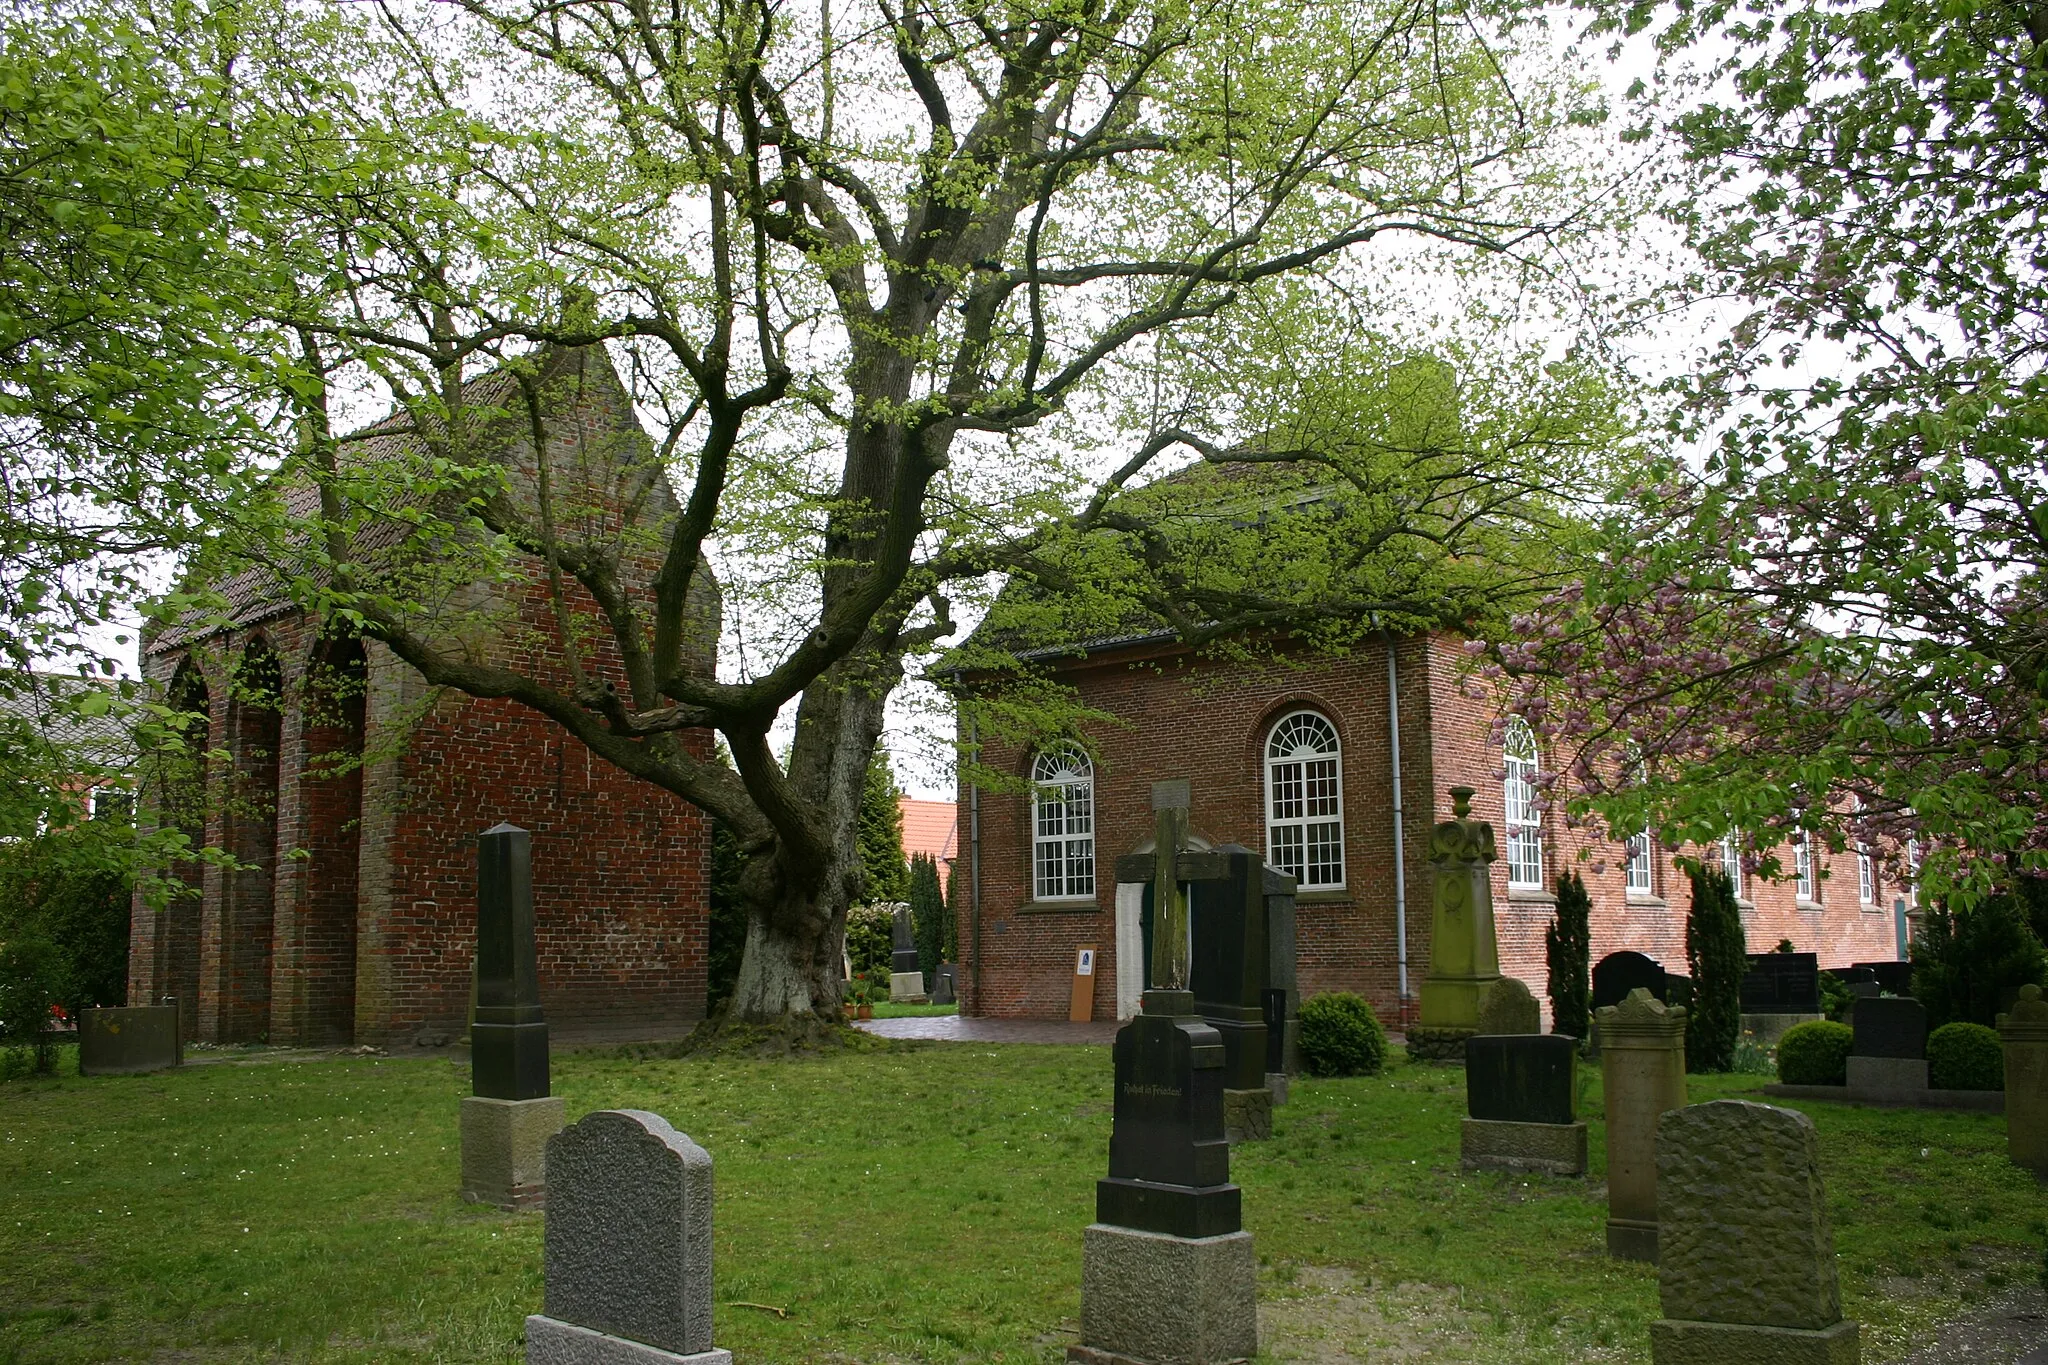 Photo showing: Historic Ss. Stephen's and Bartholomew's Church in Detern, district of Leer, East Frisia, Germany